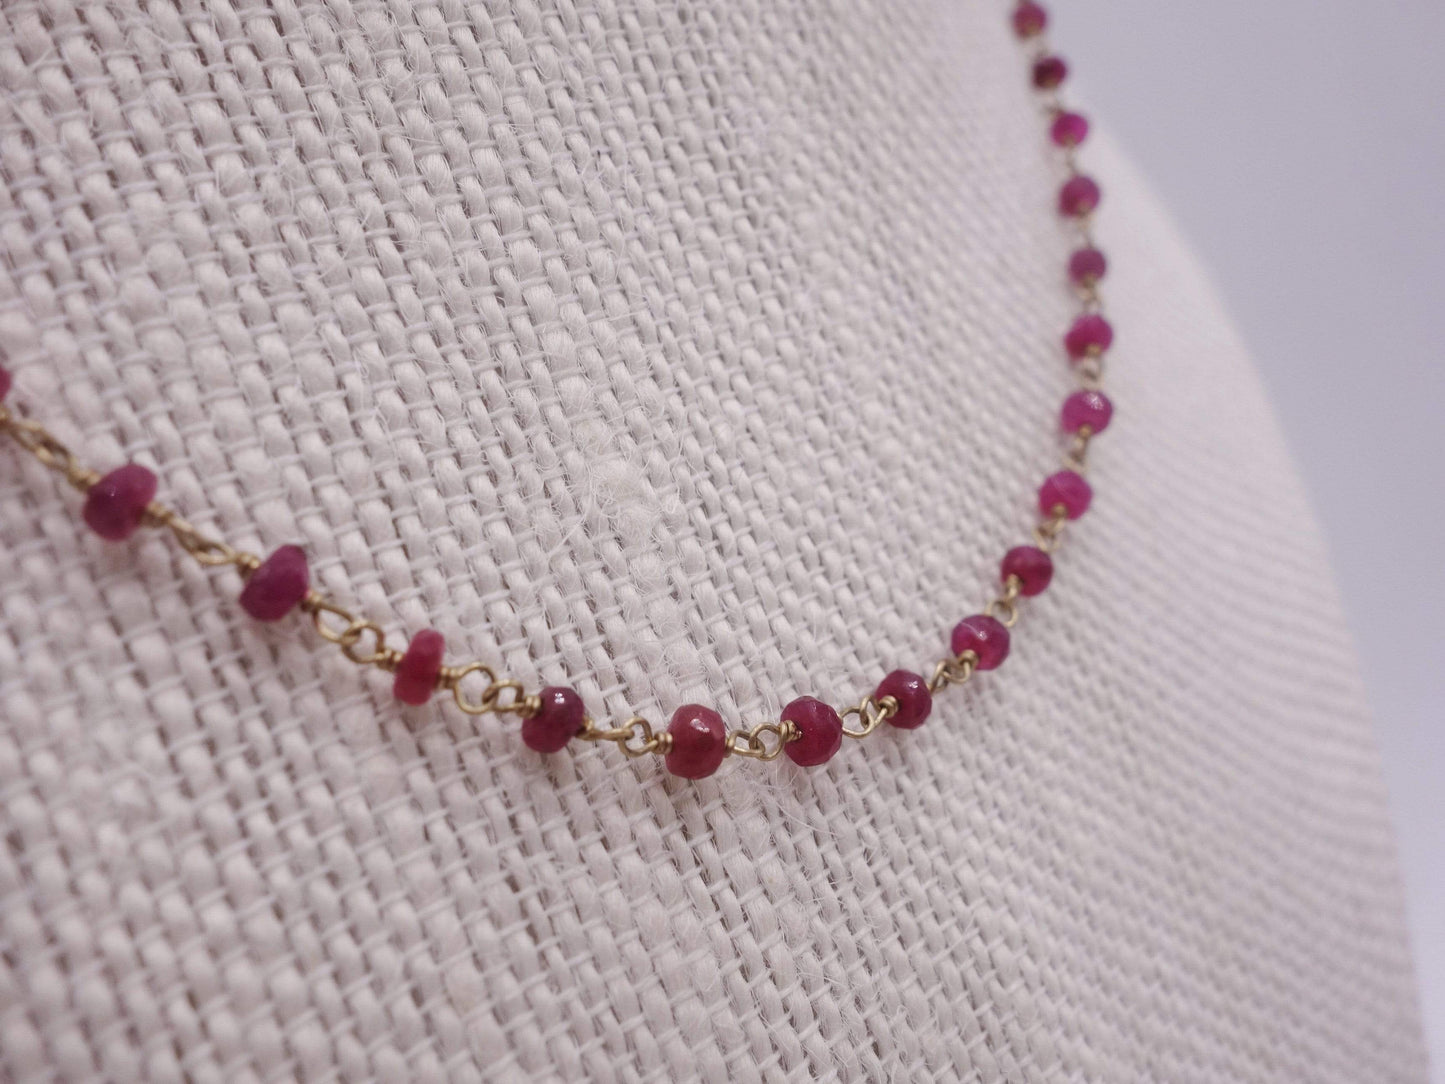 Ruby necklace wrapped with 18kt gold